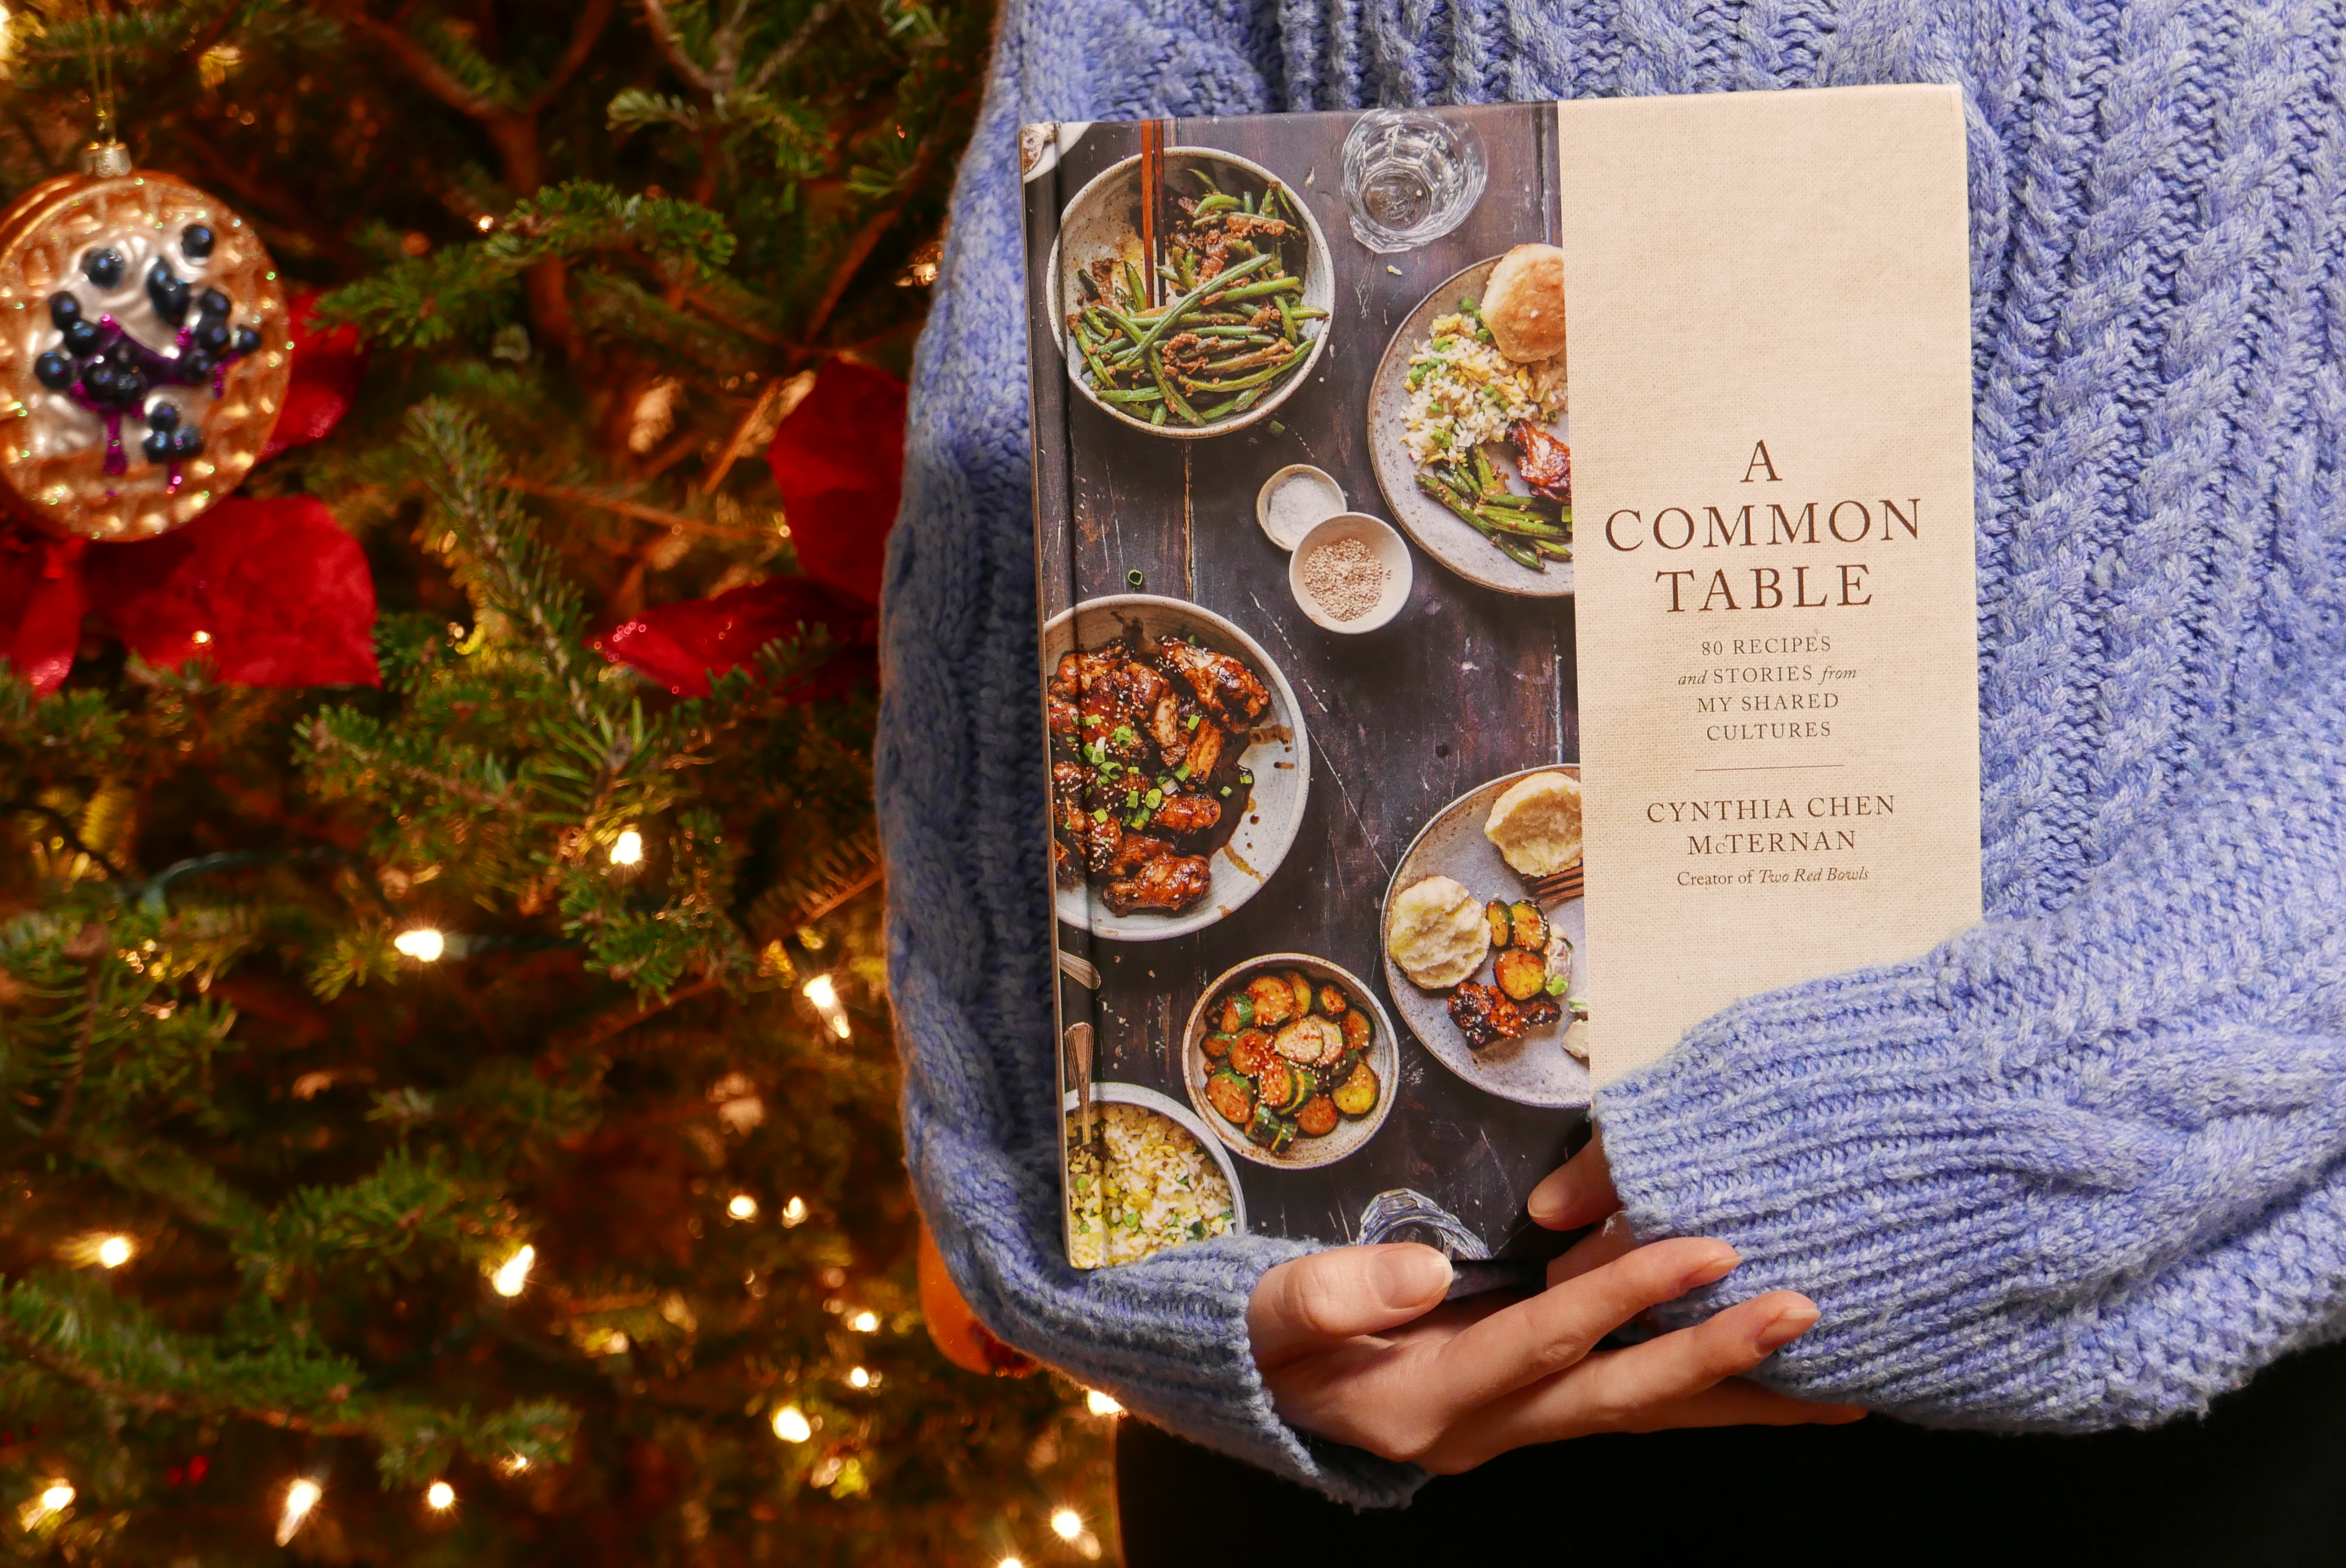 A holiday present from me to you: Cynthia's new cookbook "A Common Table"